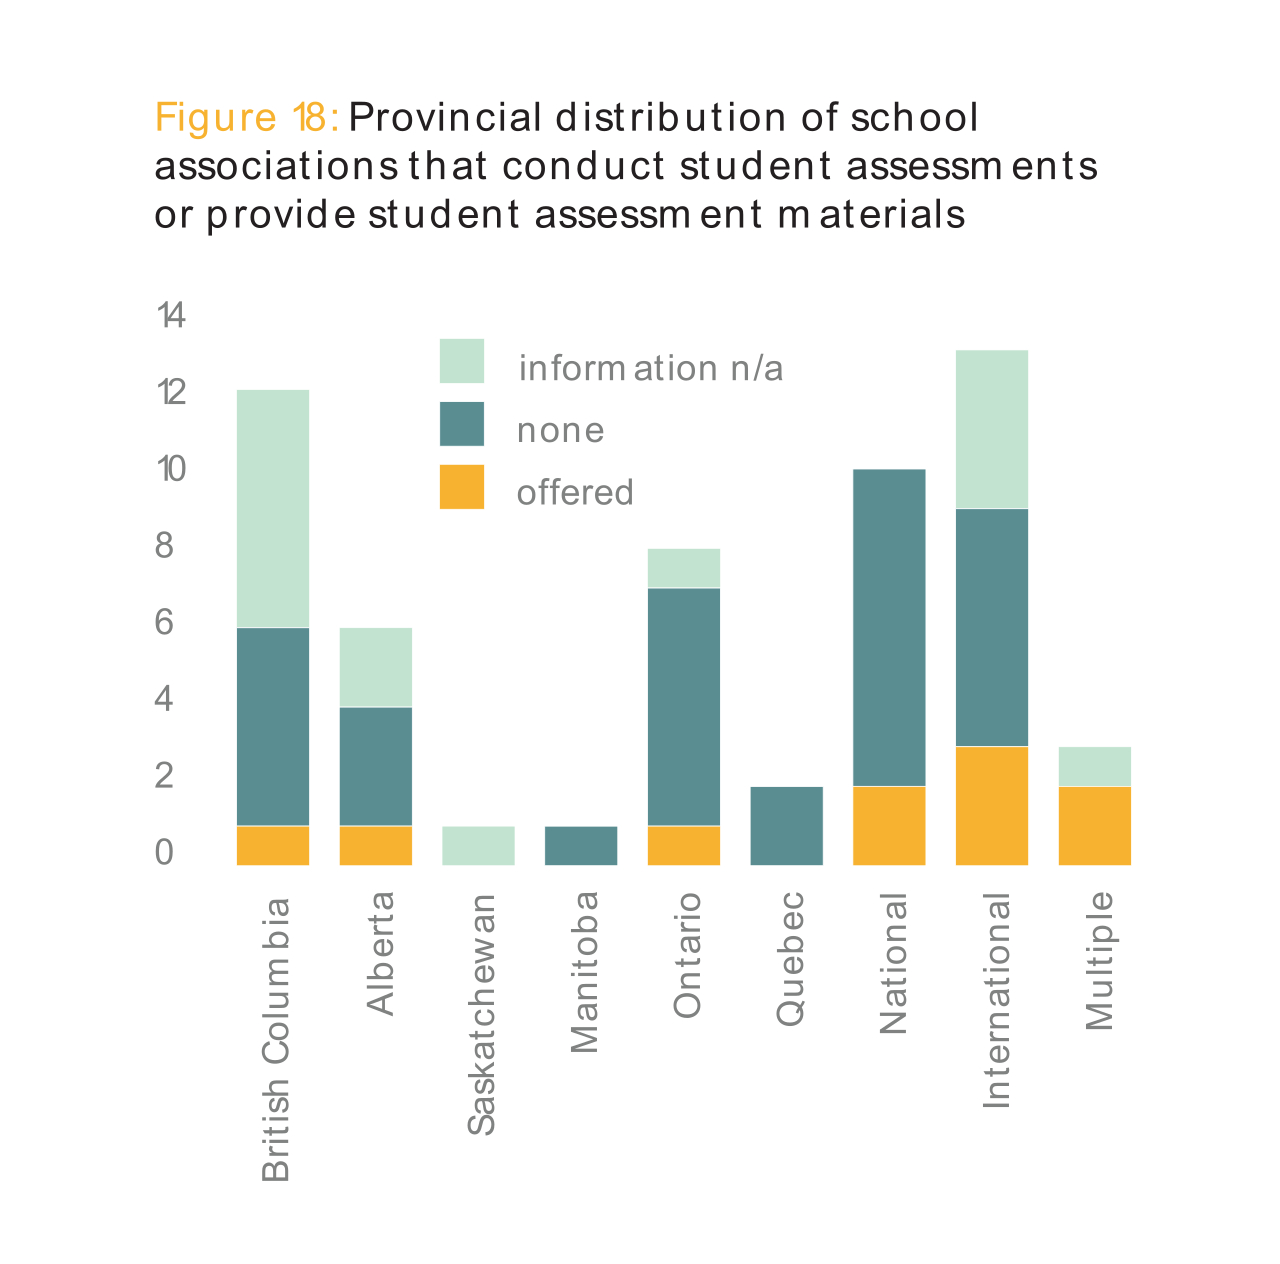 Figure 18: Provincial distribution of school associations that conduct student assessments or provide student assessment materials